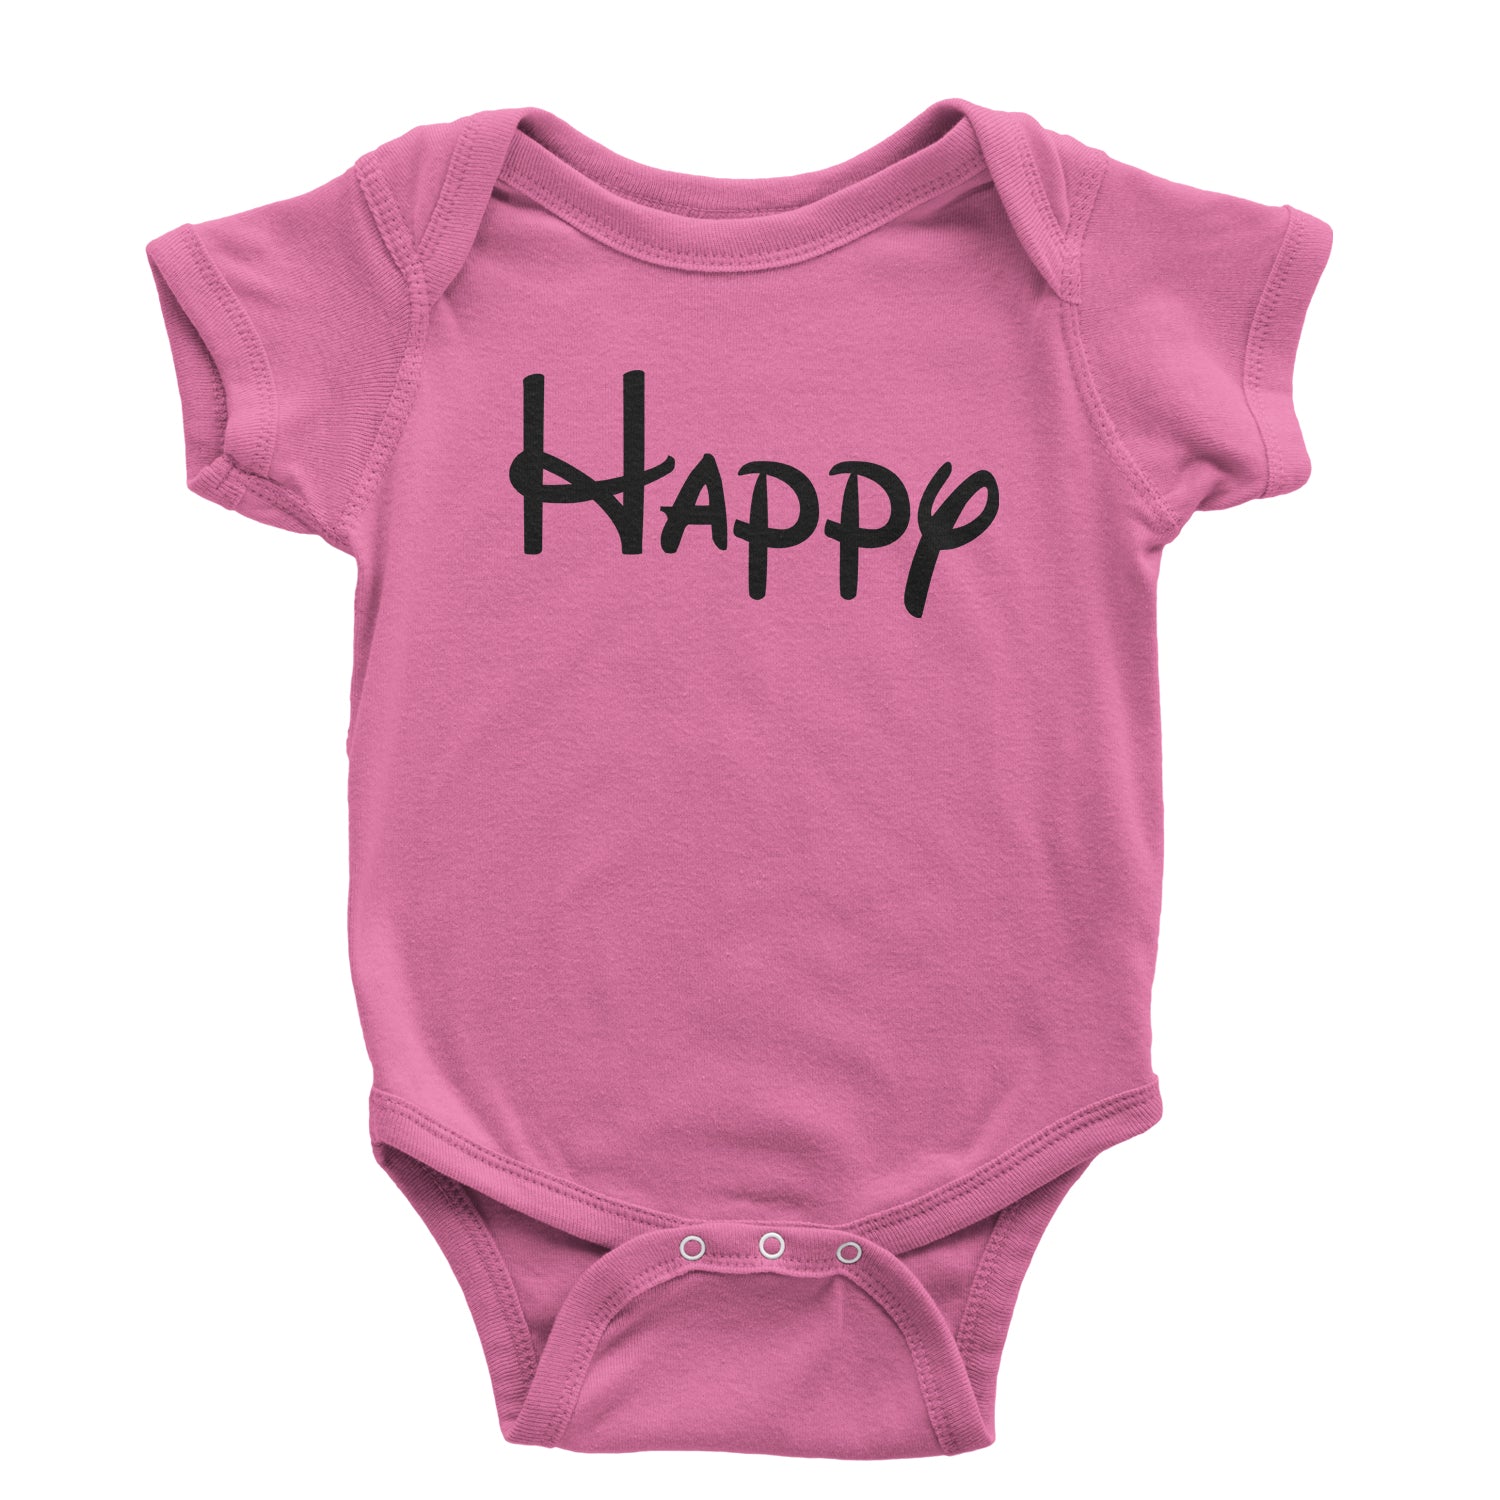 Happy - 7 Dwarfs Costume Infant One-Piece Romper Bodysuit and, costume, dwarfs, group, halloween, matching, seven, snow, the, white by Expression Tees